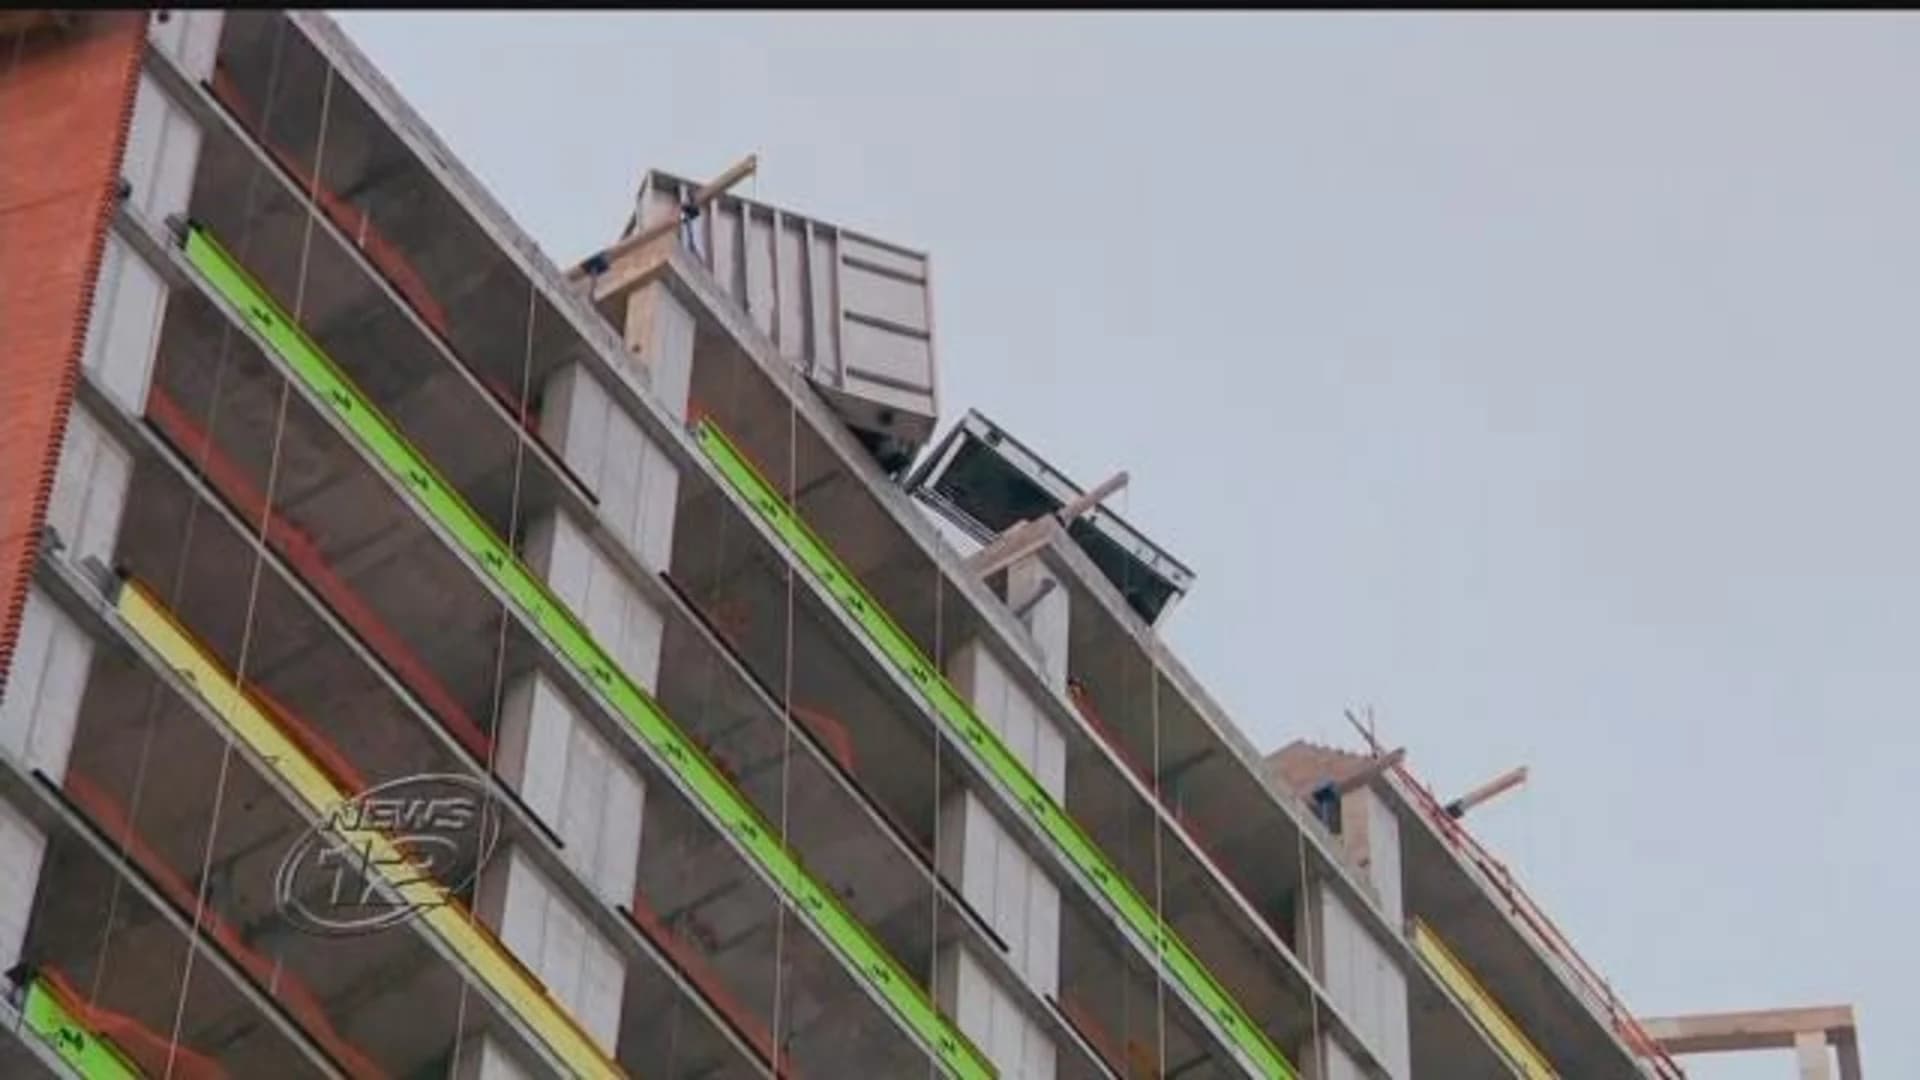 Firefighters secure A/C units that nearly fell off Yonkers building